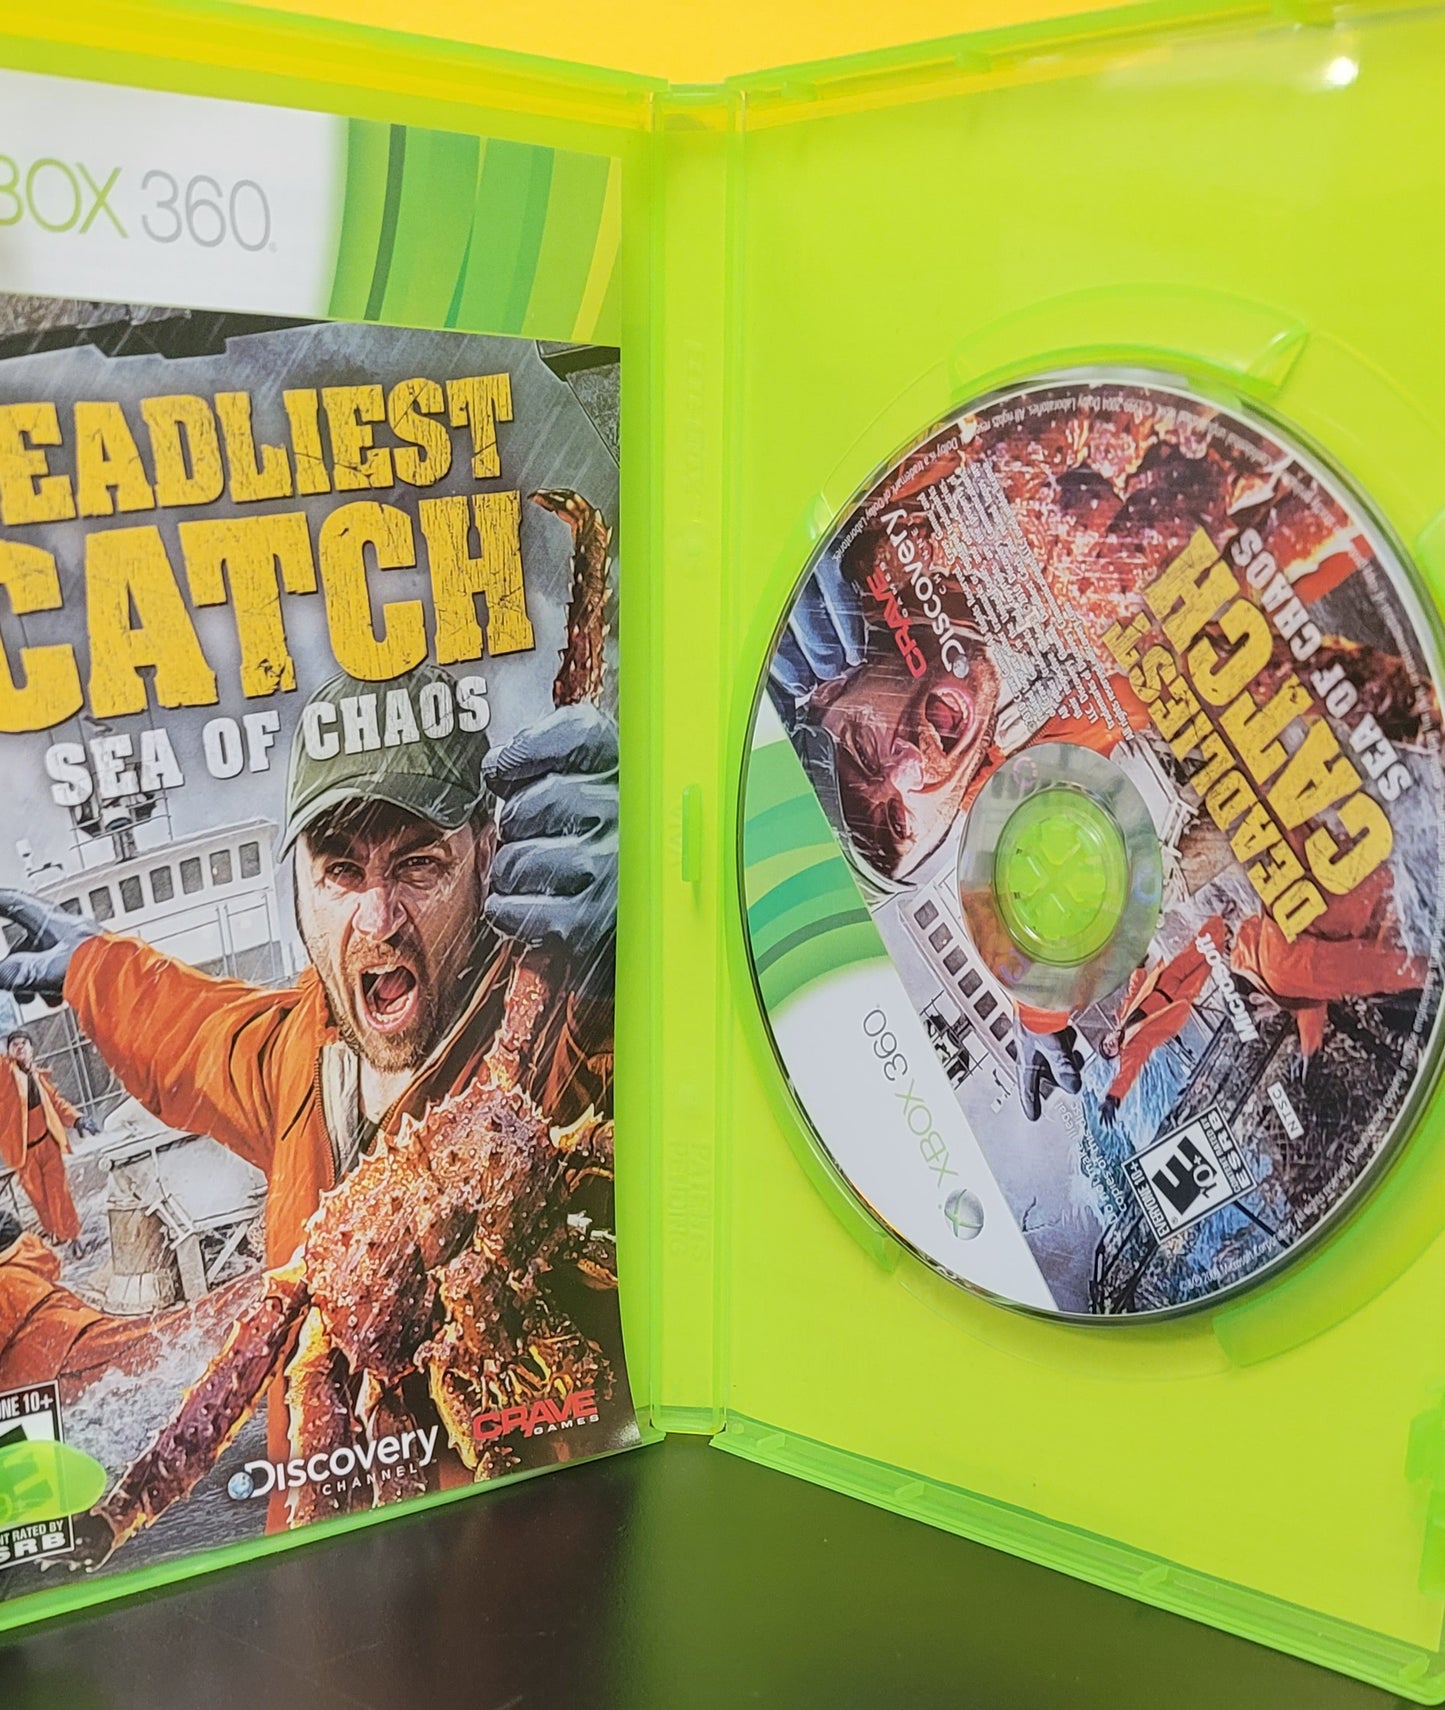 Deadliest Catch Sea of Chaos - Xb360 - Used